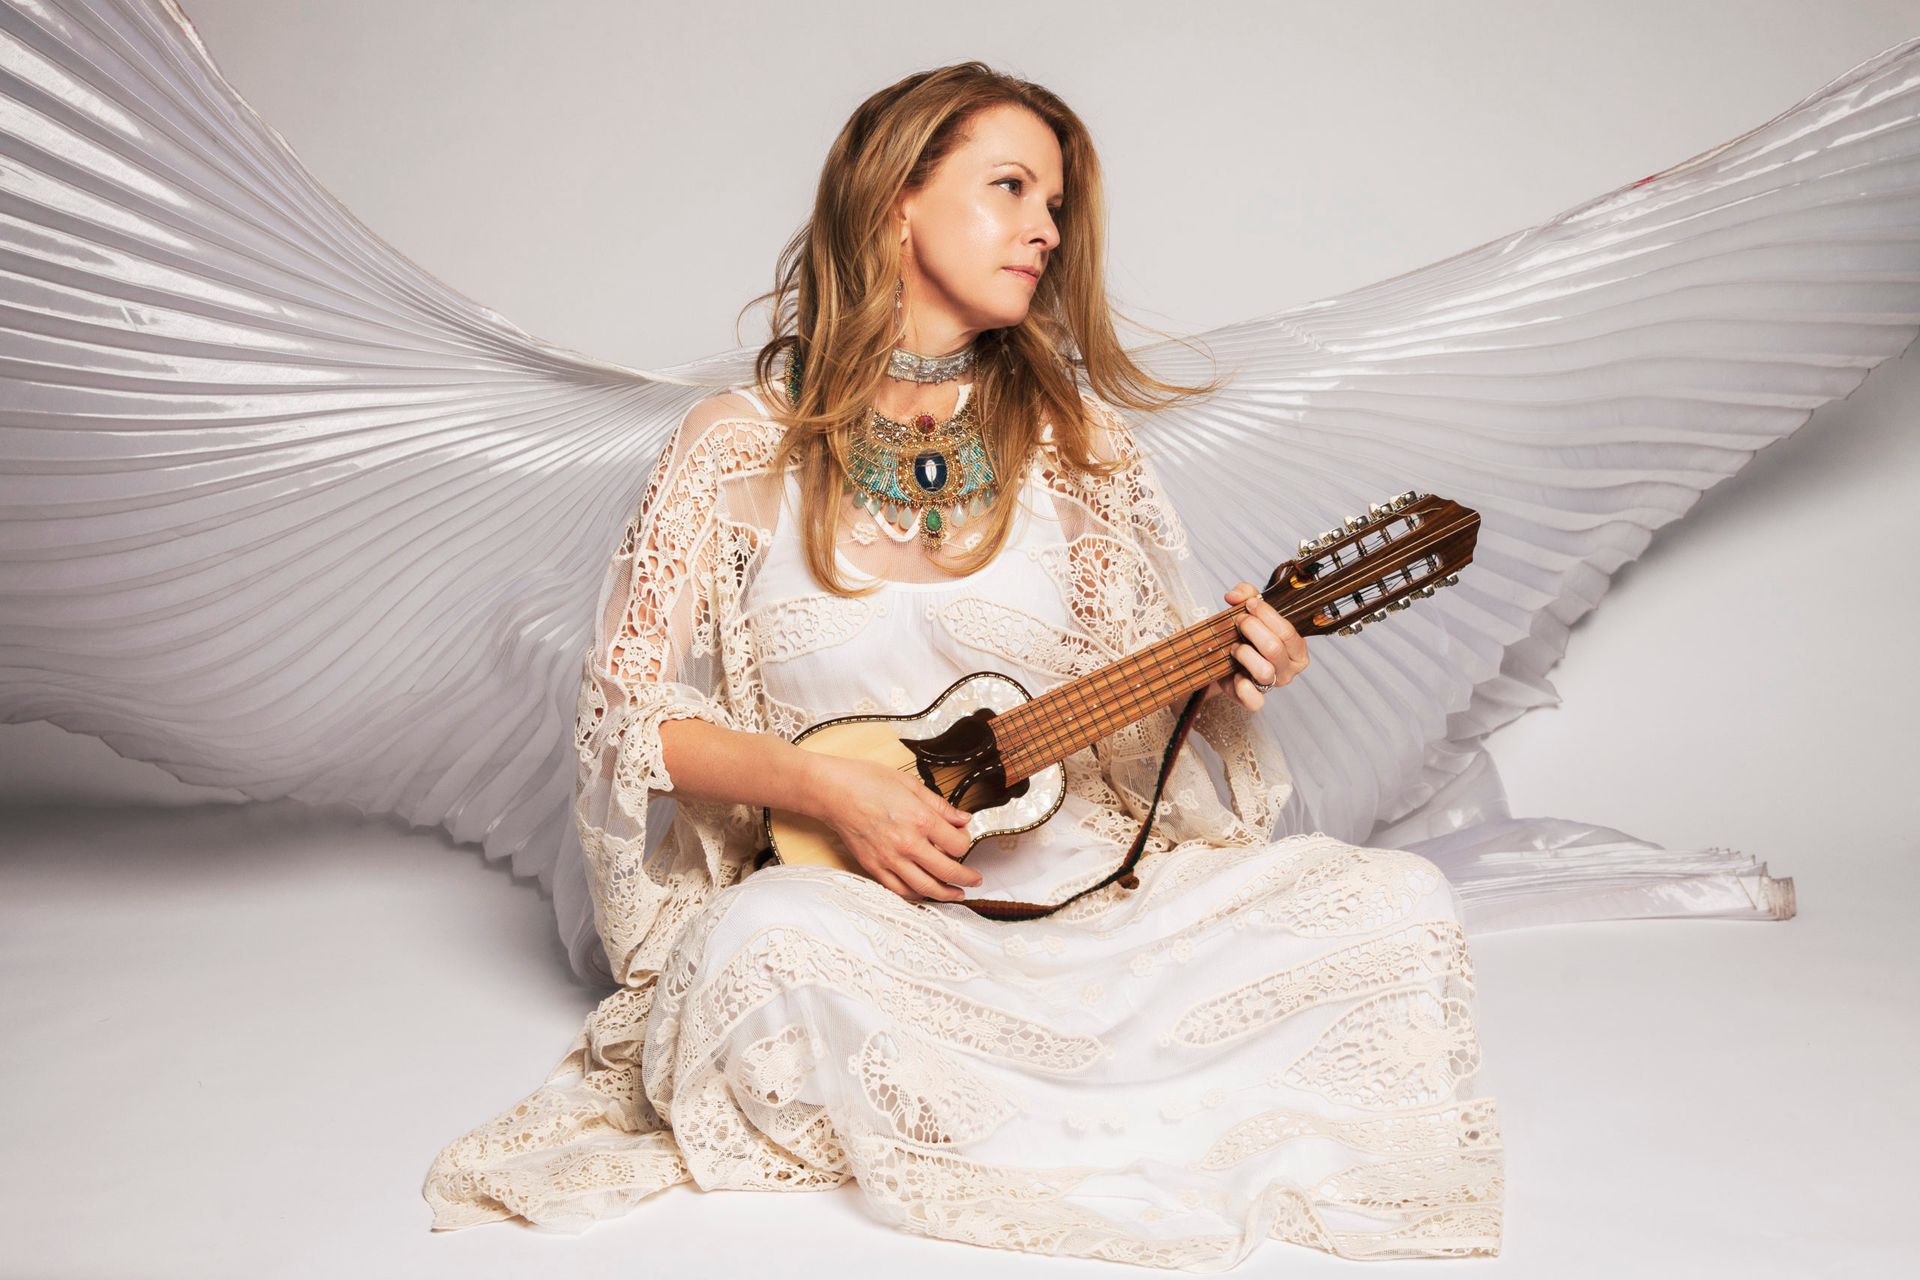 Image of Kimberley Haynes in white with angelic wings, for the song Grant Us Peace